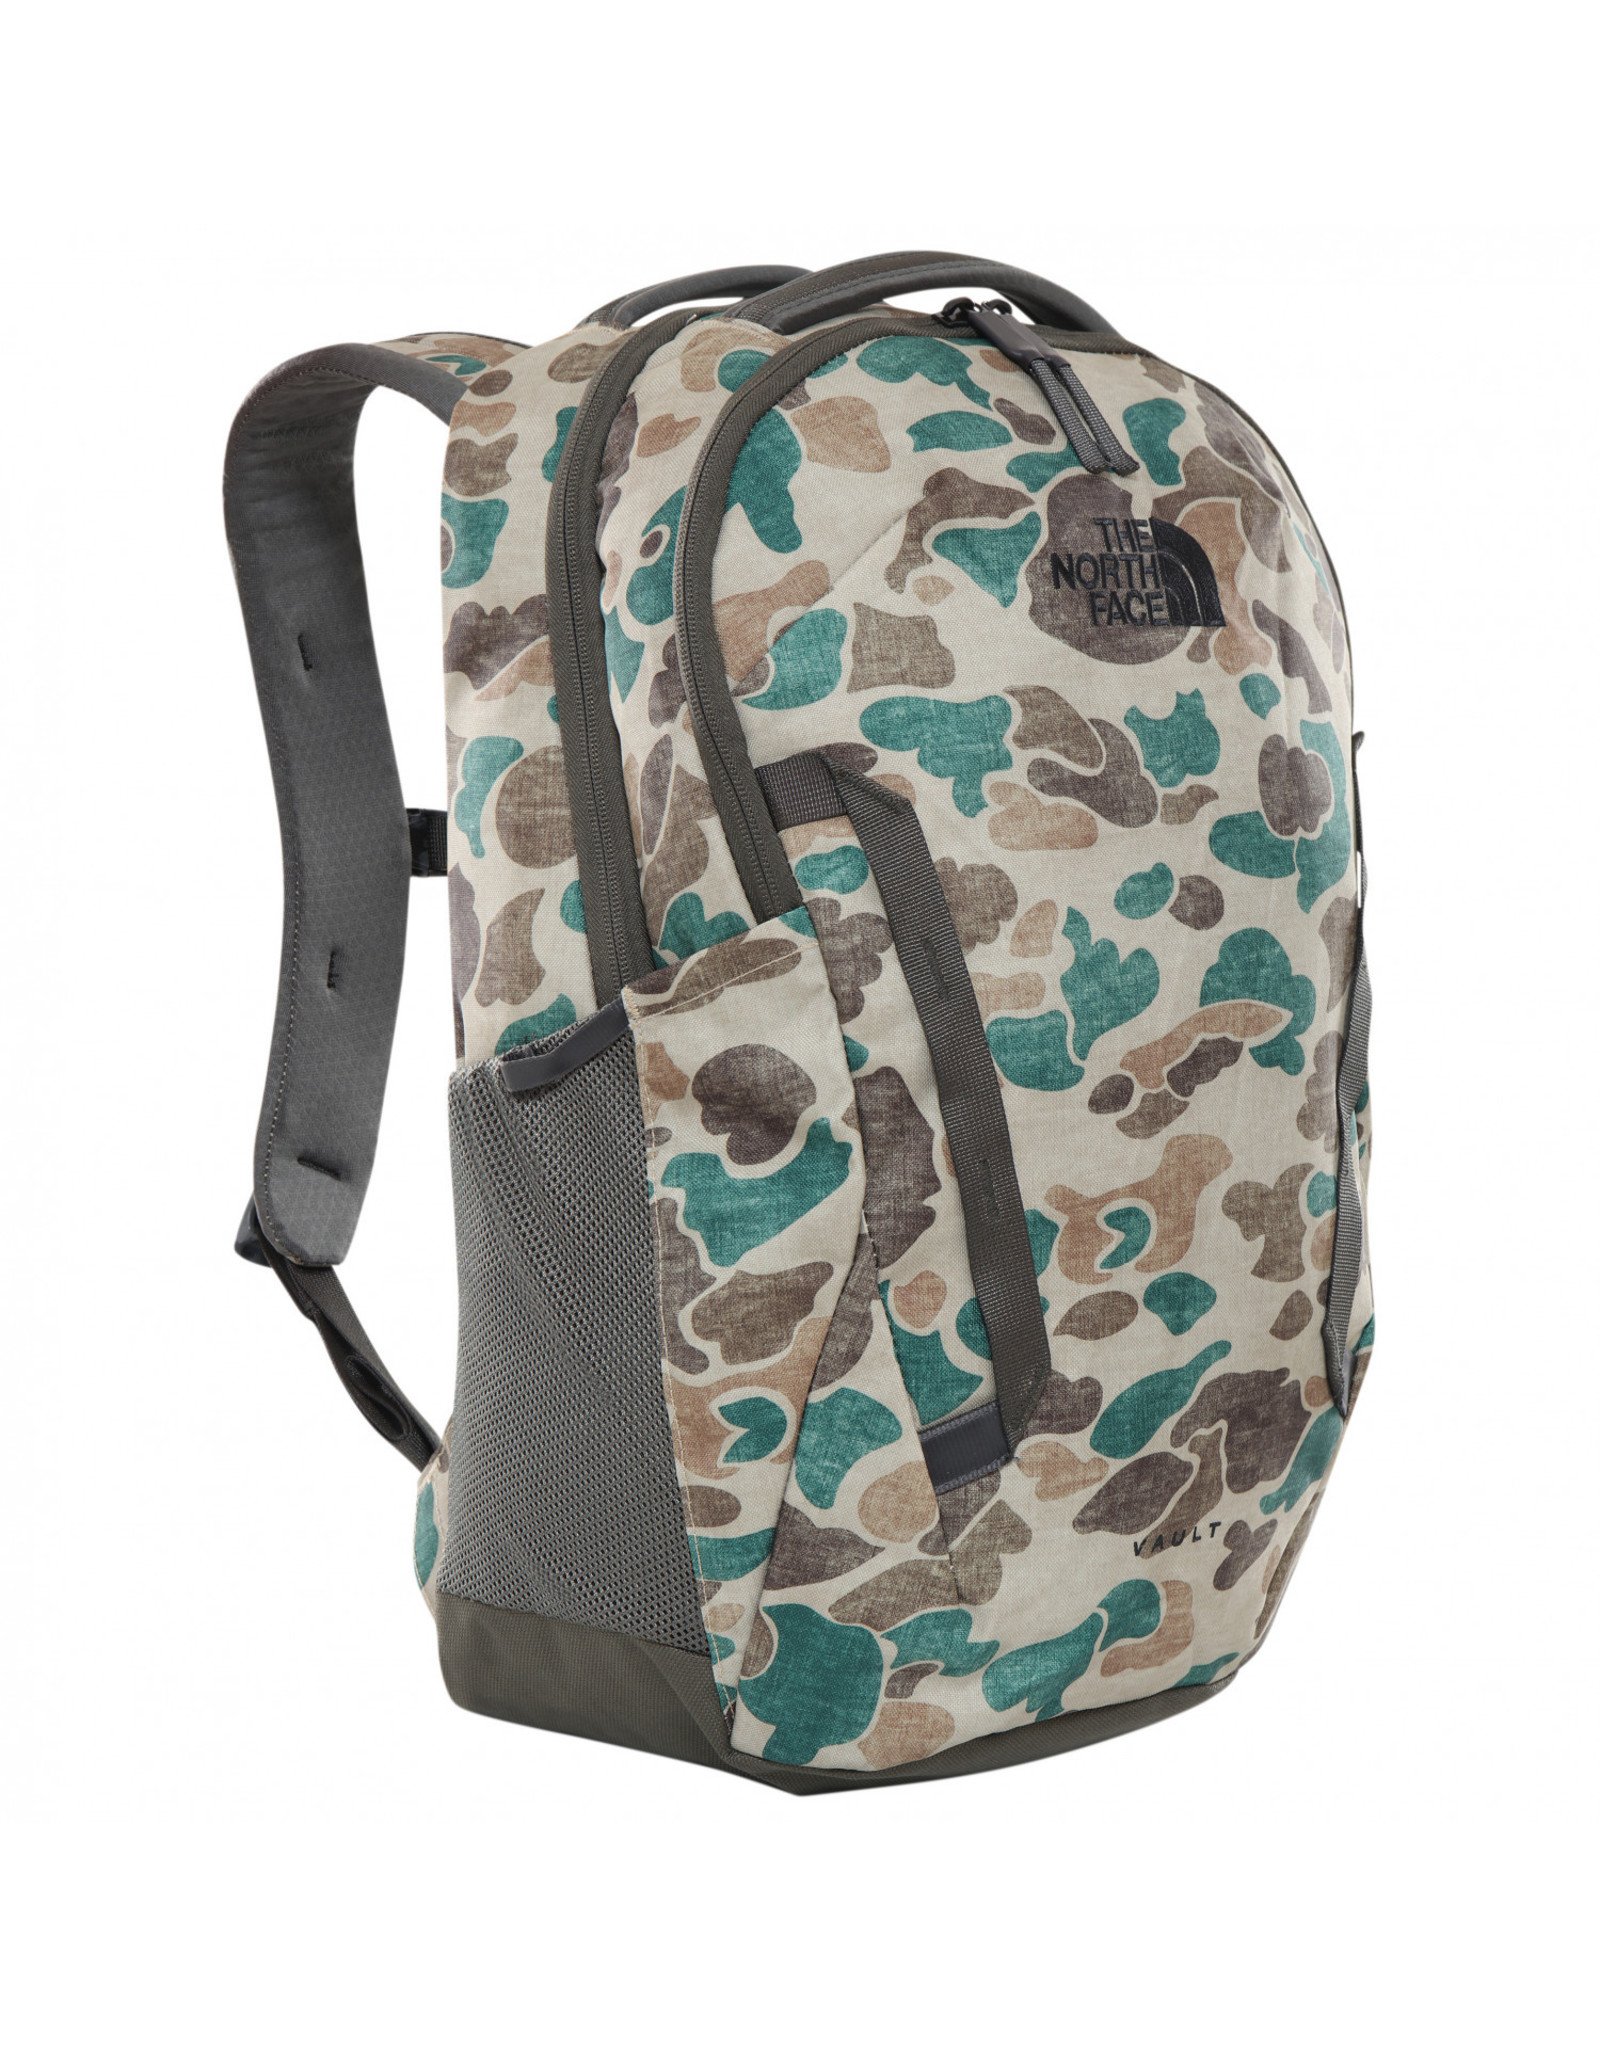 THE NORTH FACE VAULT DAYPACK 26L